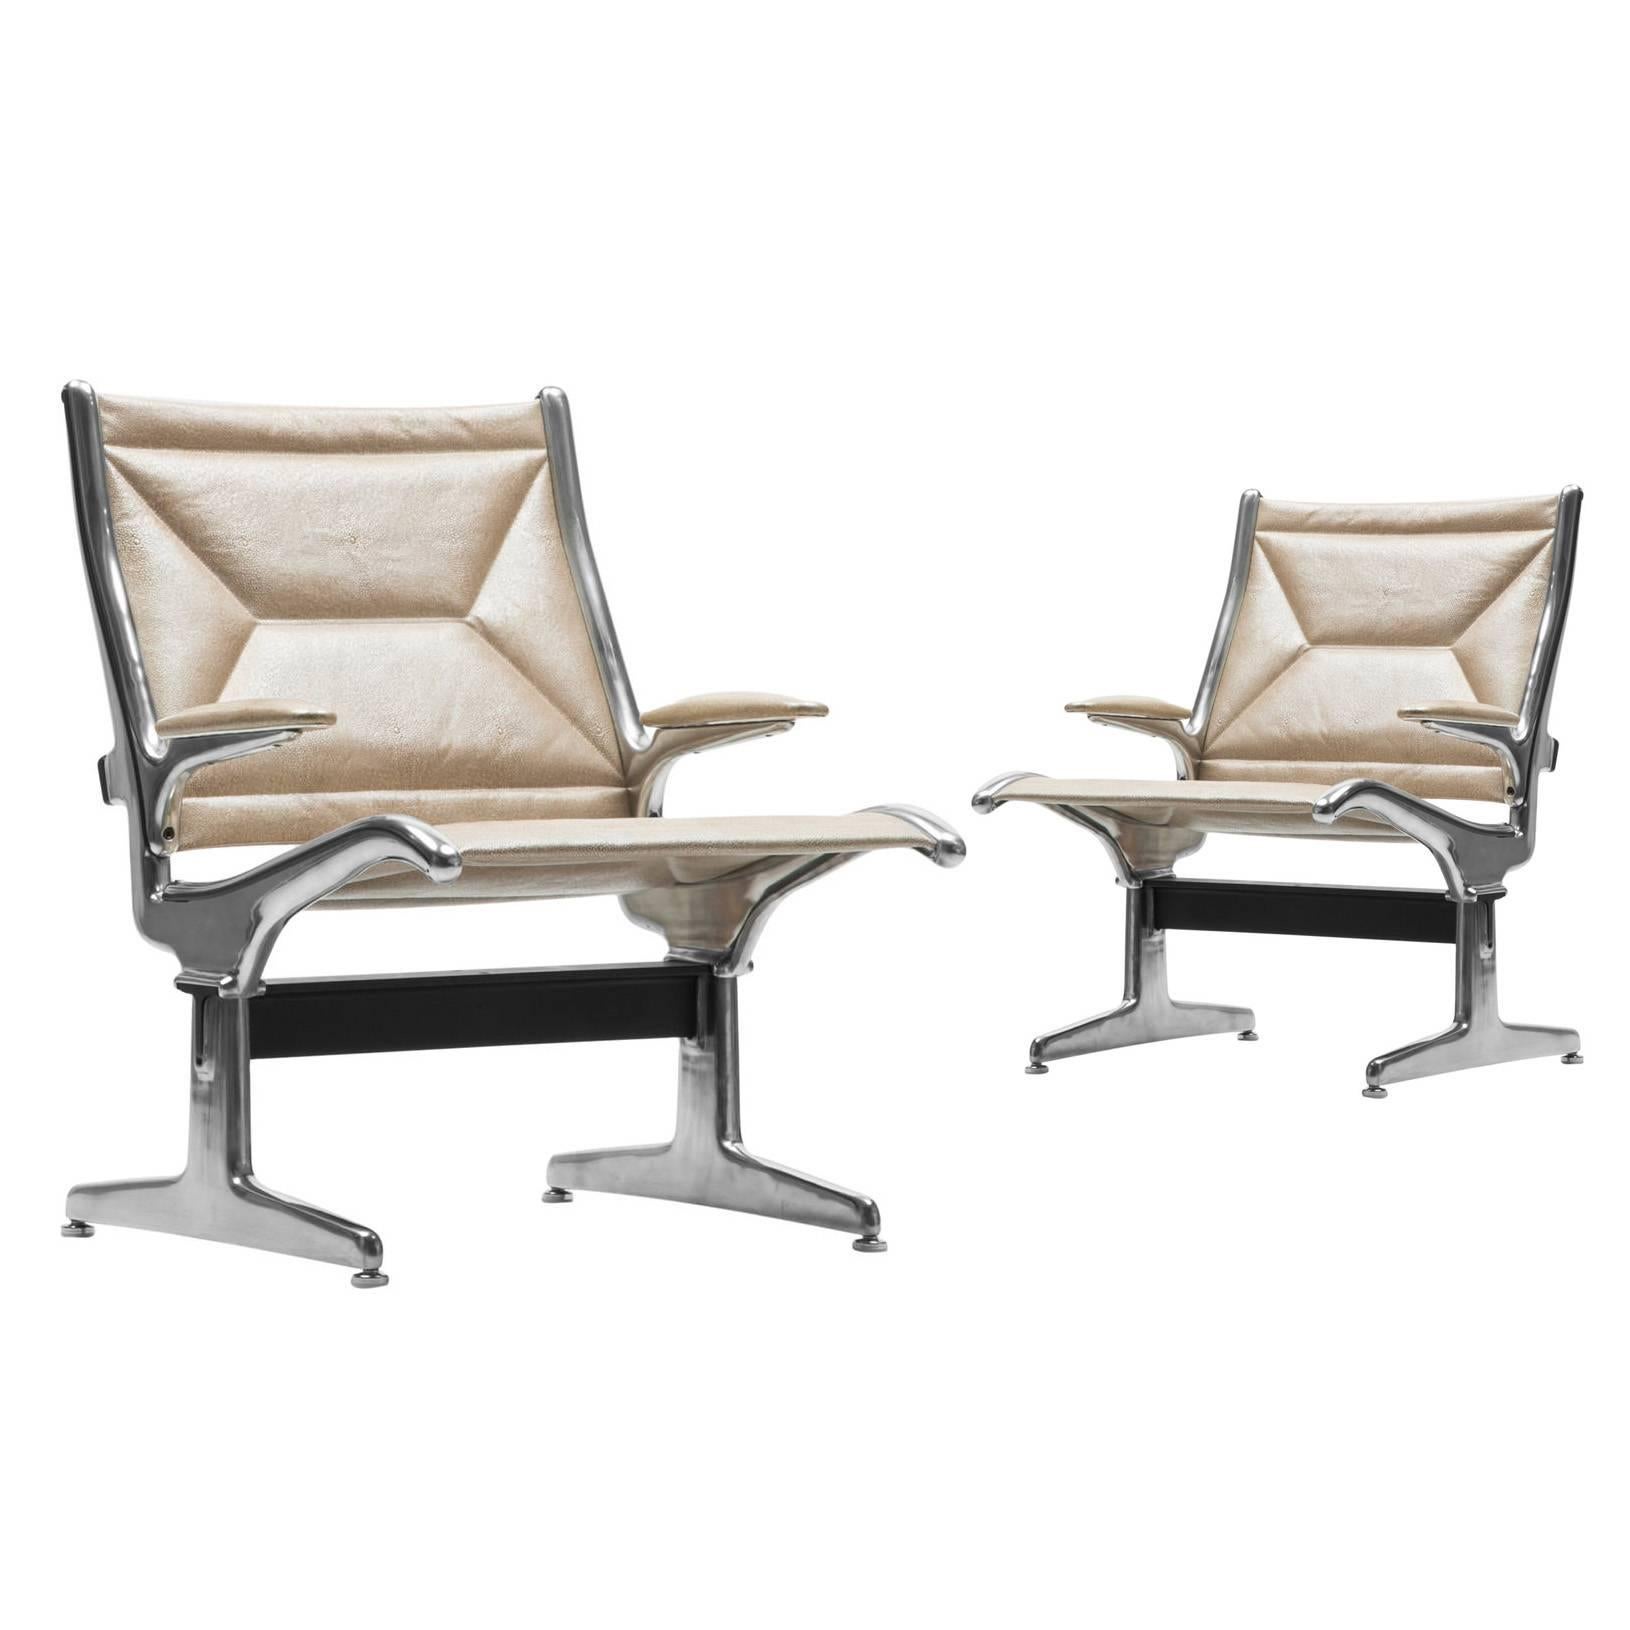 Eames for Herman Miller Tandem Sling Airport Chair in Cream Edelman Leather